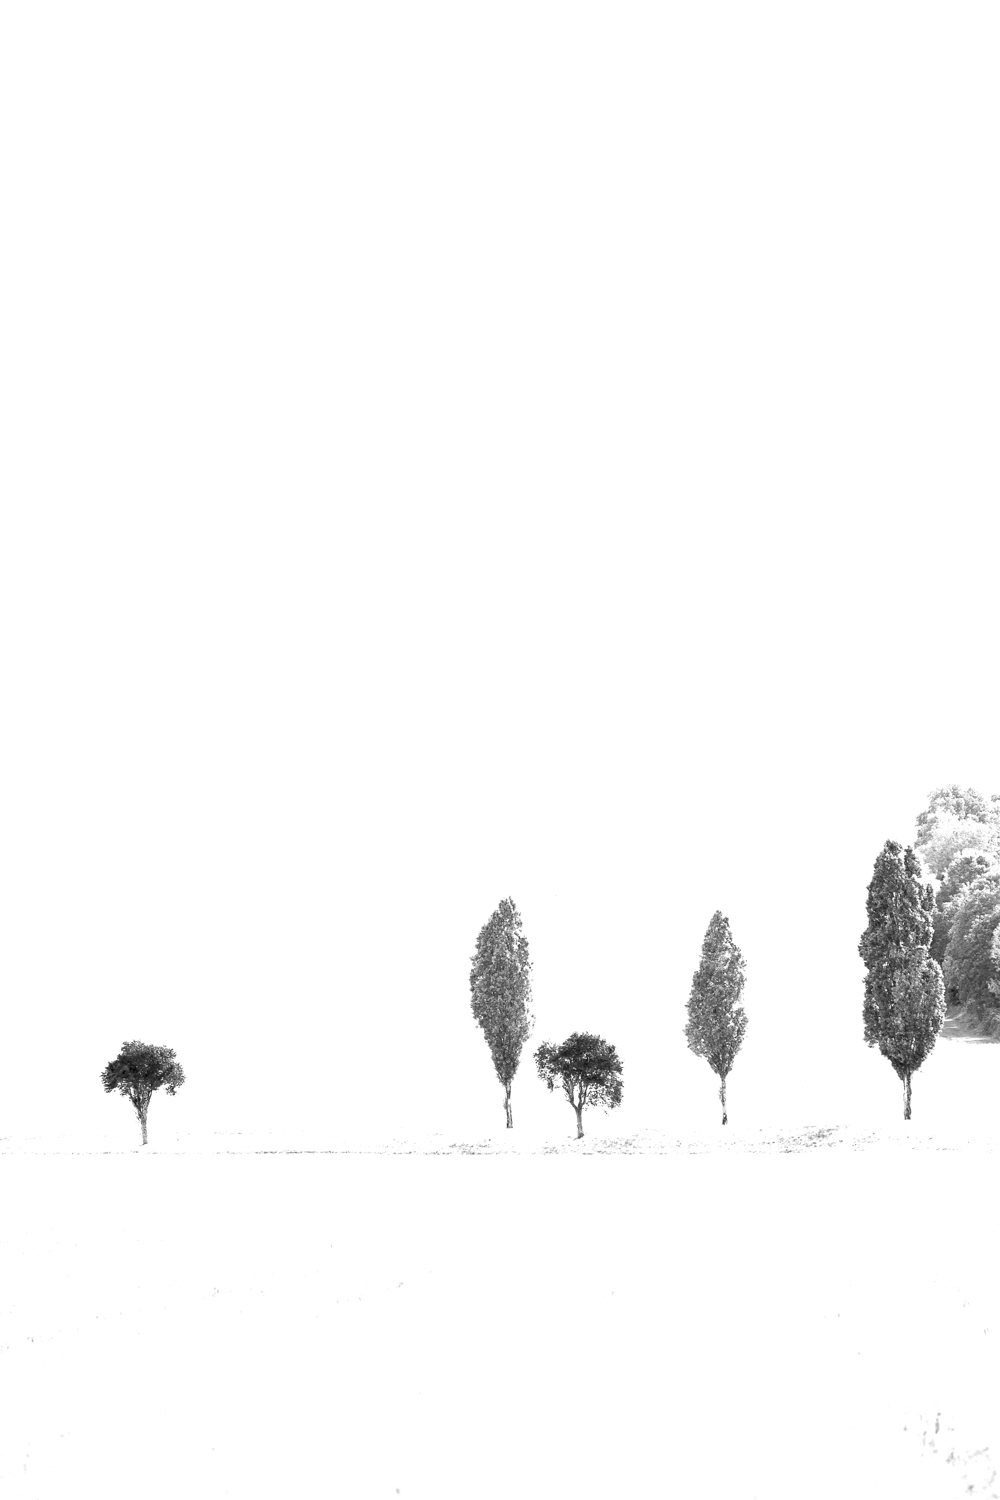 Minimalistic black-and-white portrait of trees in Bourgogne by Karen Ketels